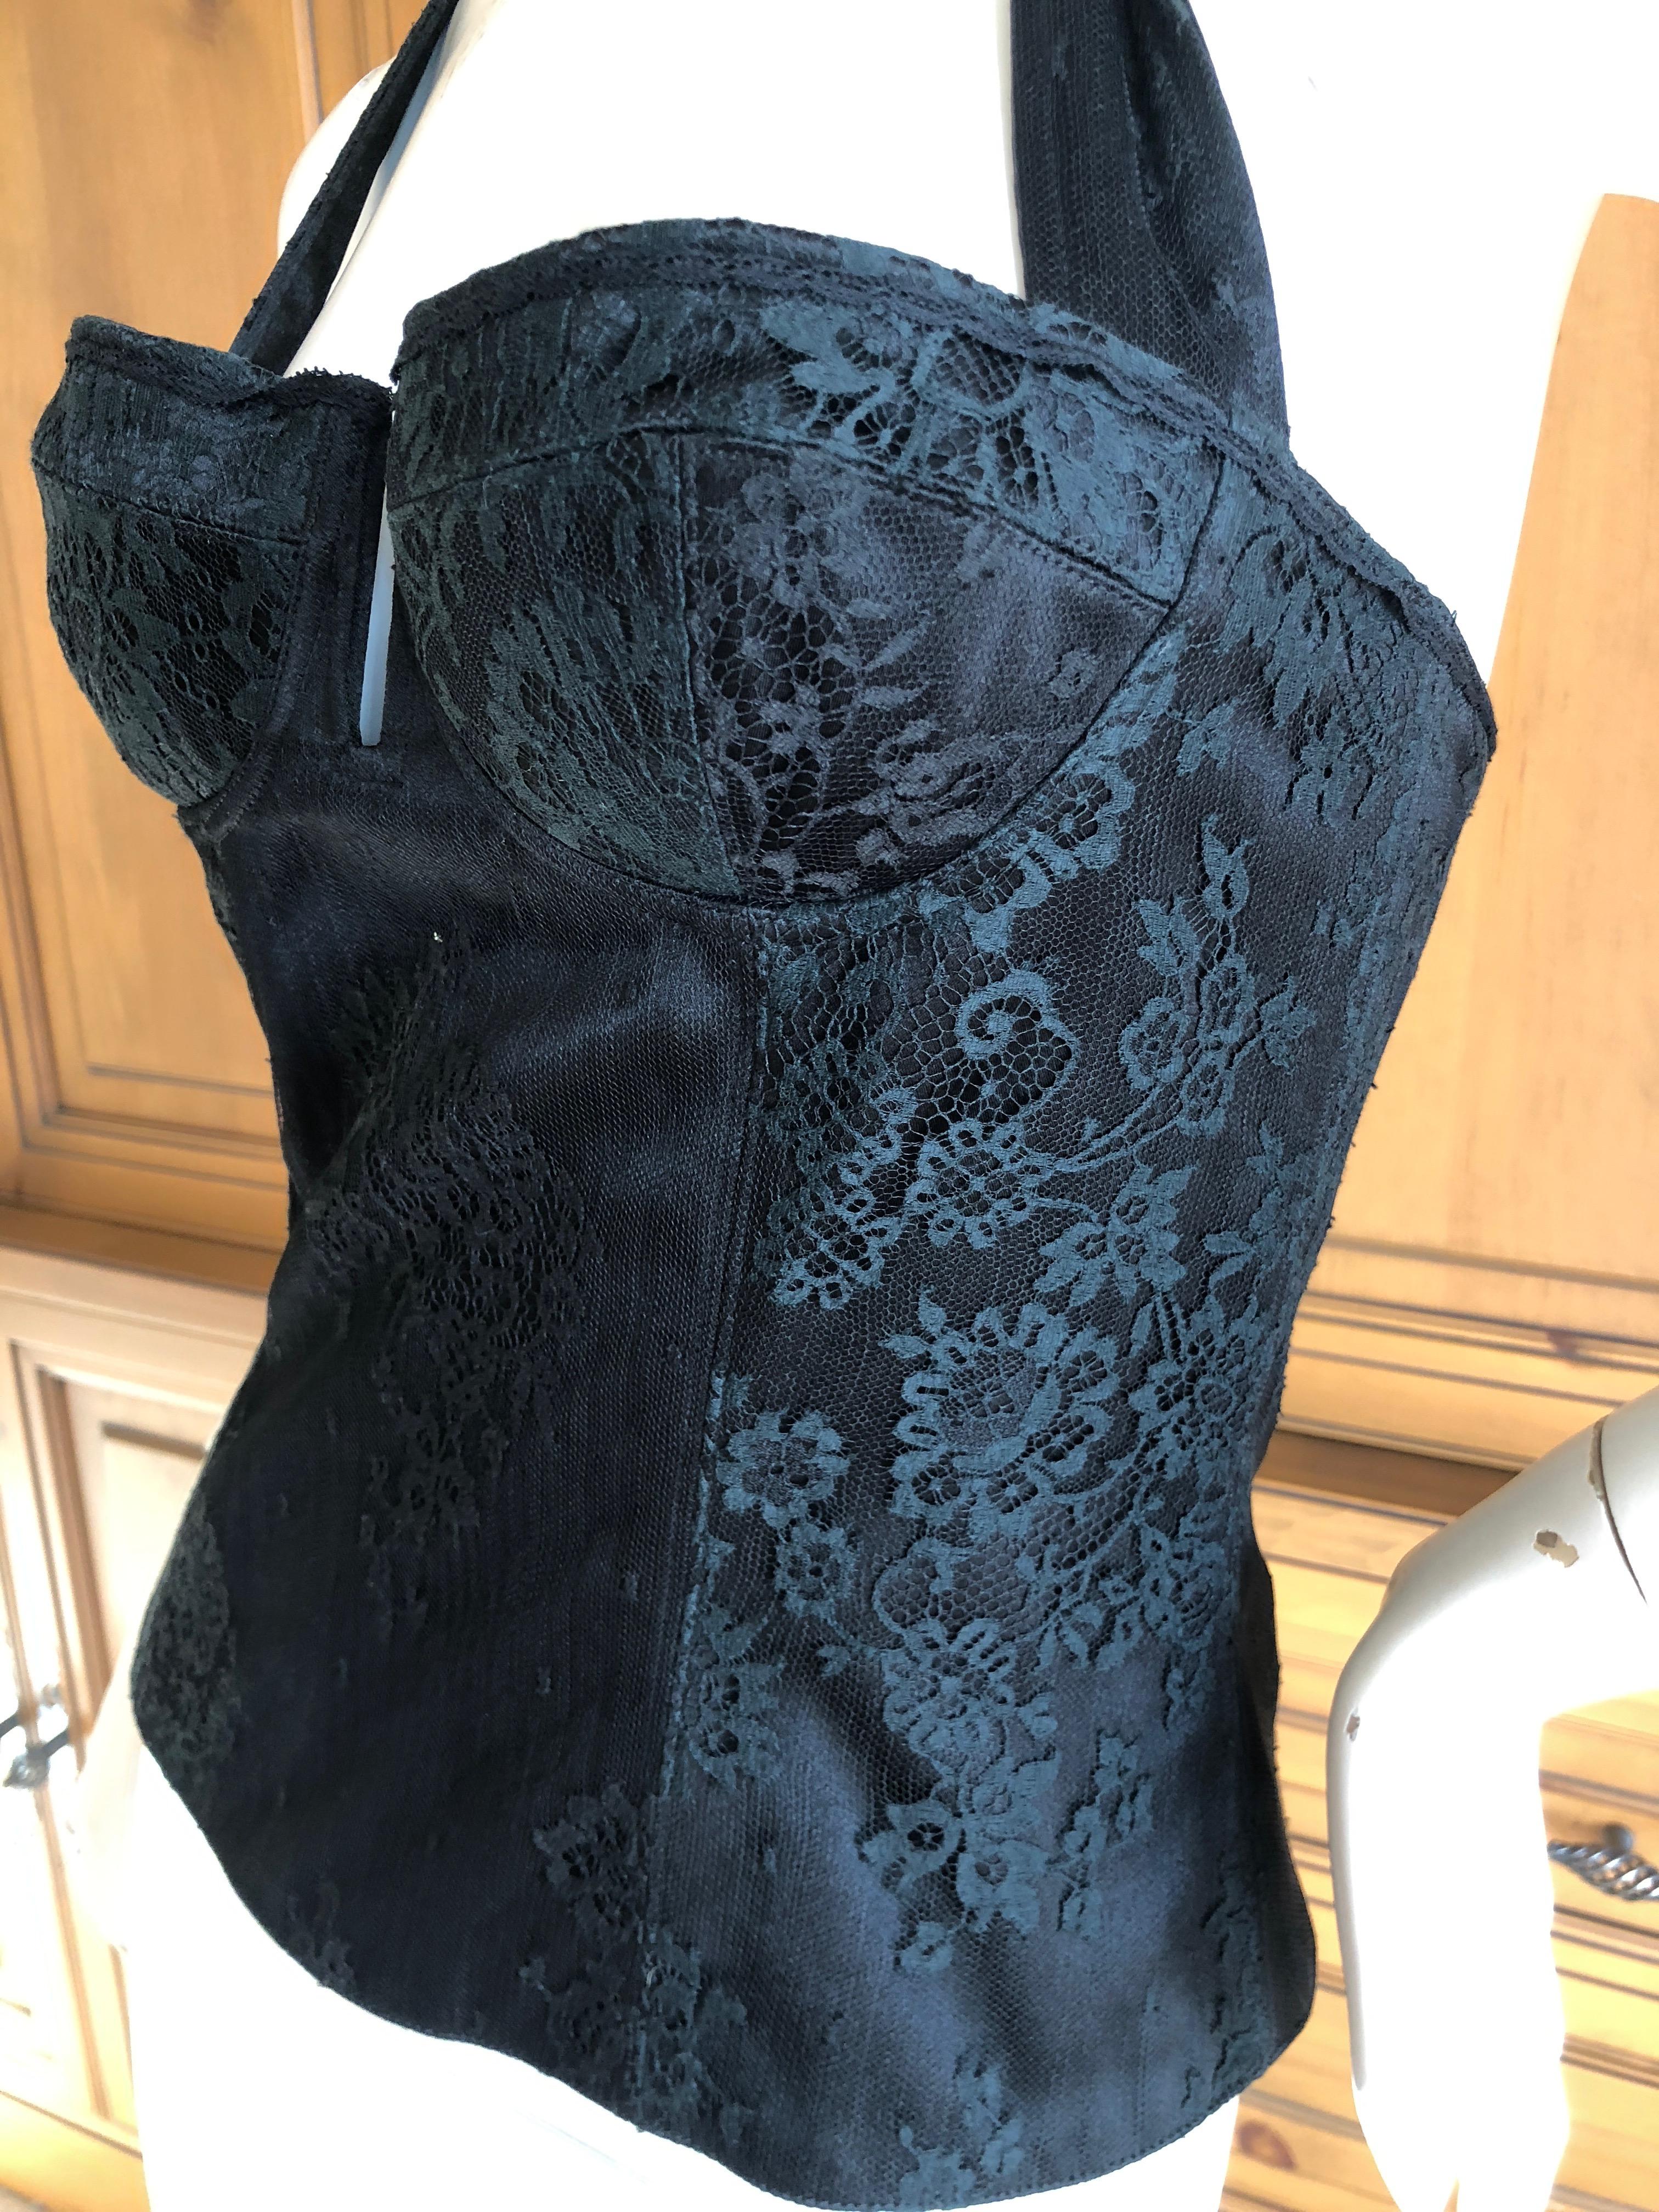 Christian Dior by John Galliano Vintage Black Lace Corset NWT Size 38 For Sale 3